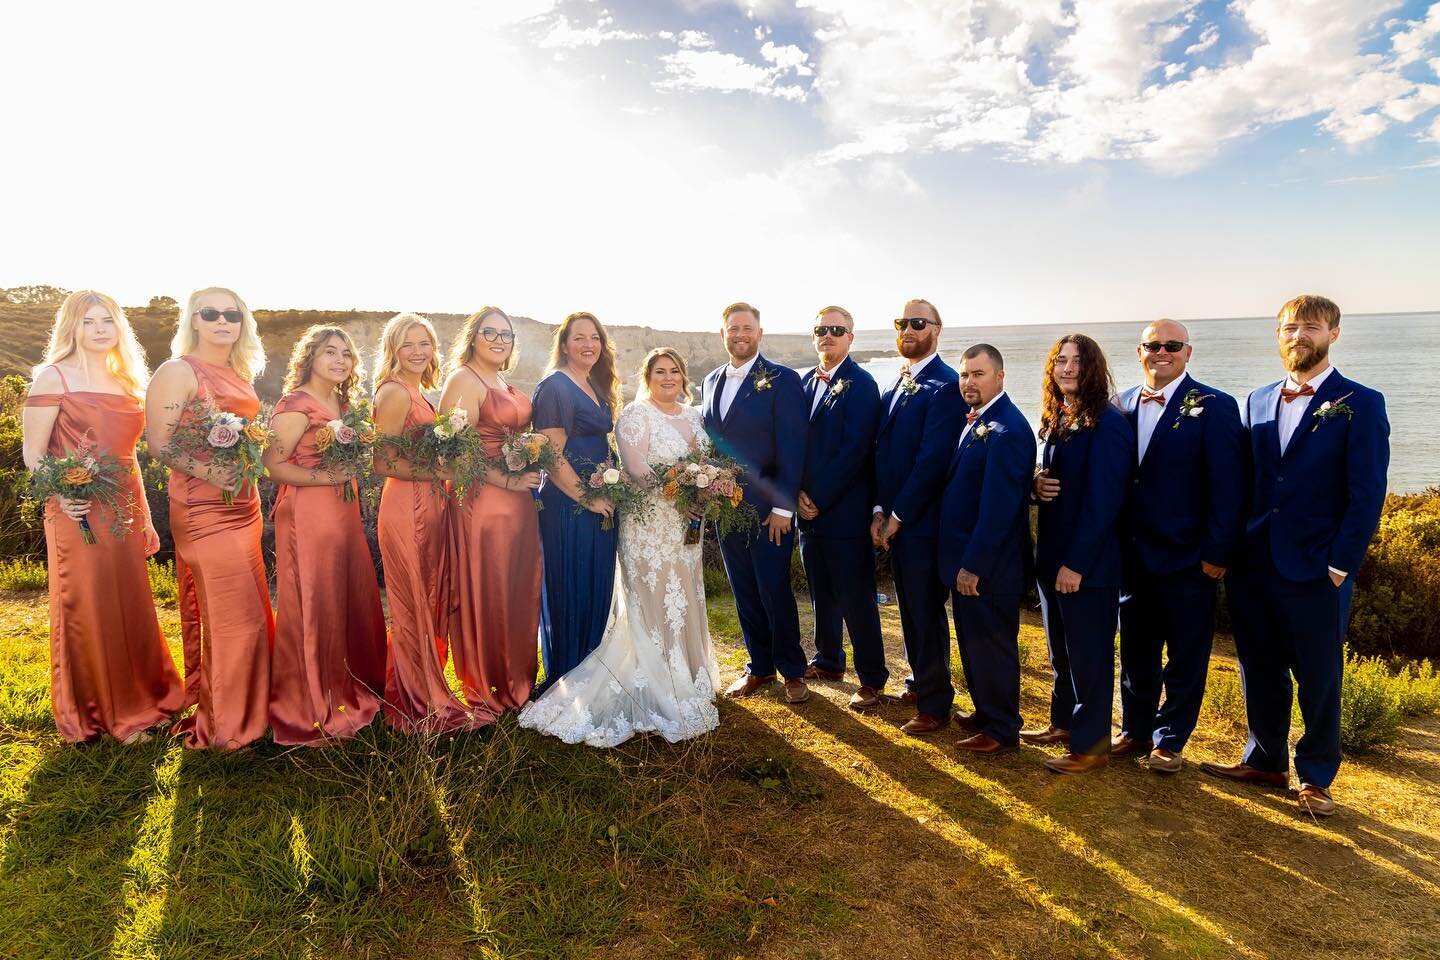 What is spectacular location for a beach wedding&hellip;! Like a little vacation destination, all this followed up by a woodfired pizza reception&hellip; We had such a great time!

#weddingphotography #wedding #weddinginspiration #weddingday #bride #